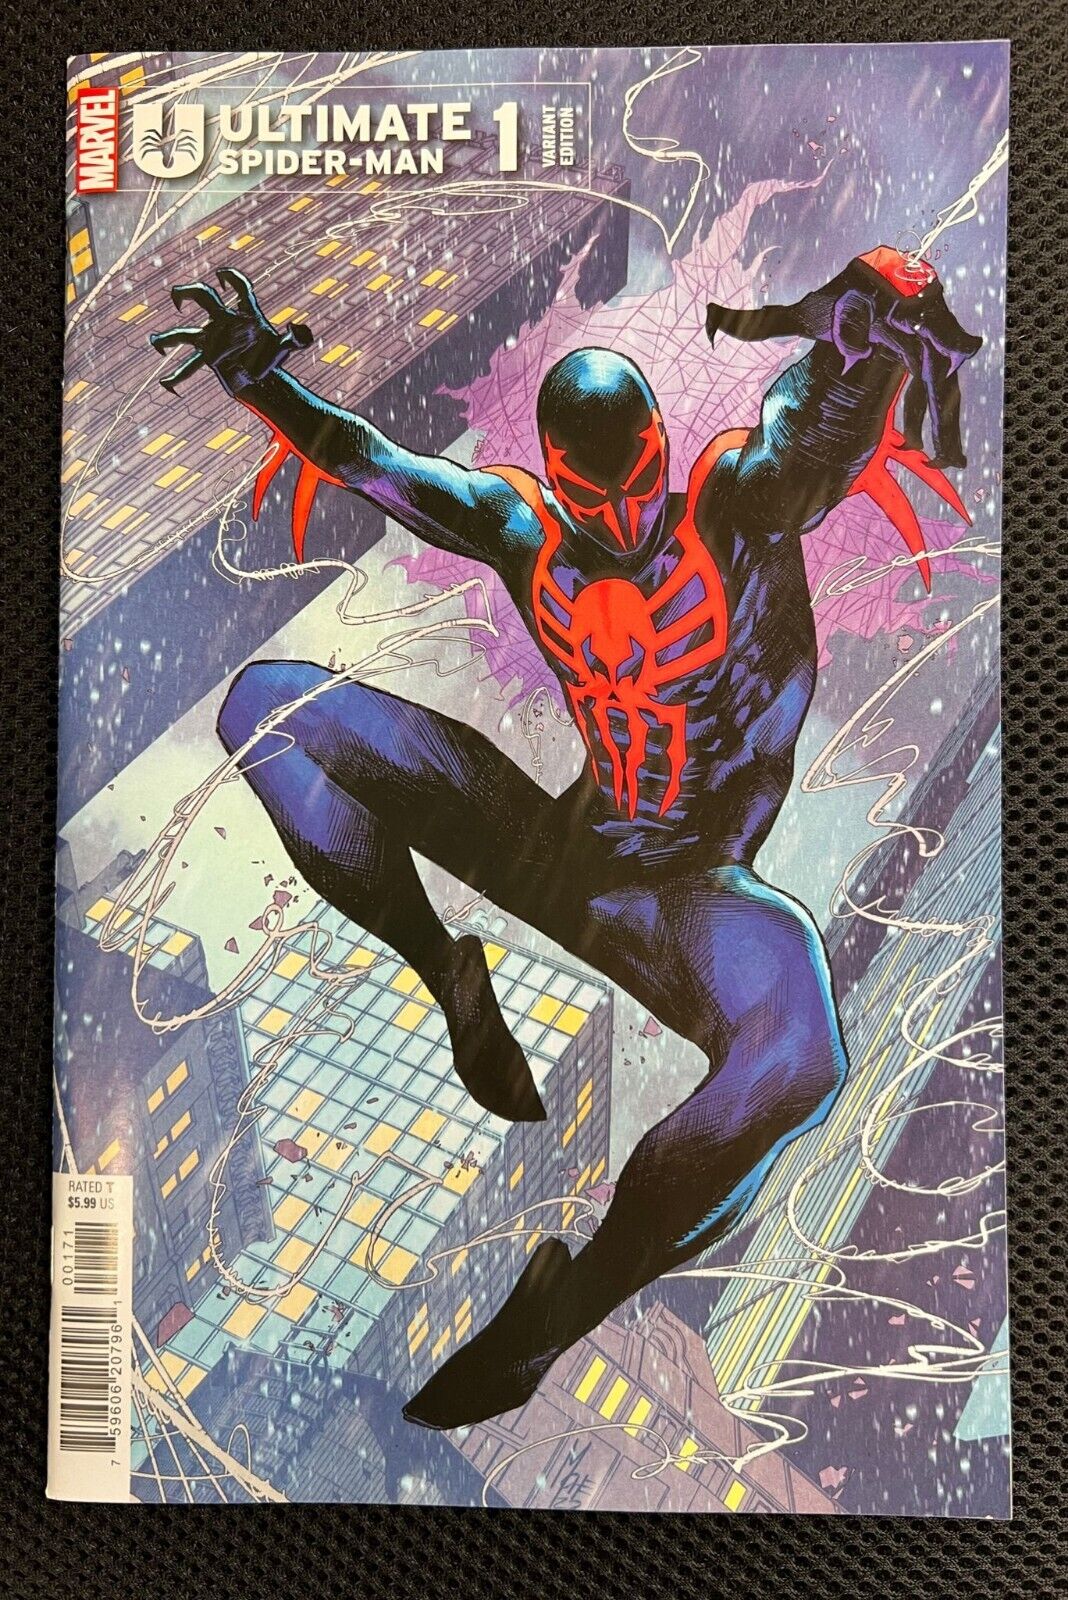 ULTIMATE SPIDER-MAN #1 Checchetto Costume Tease Variant Cover C  Spidey 2099 NM+